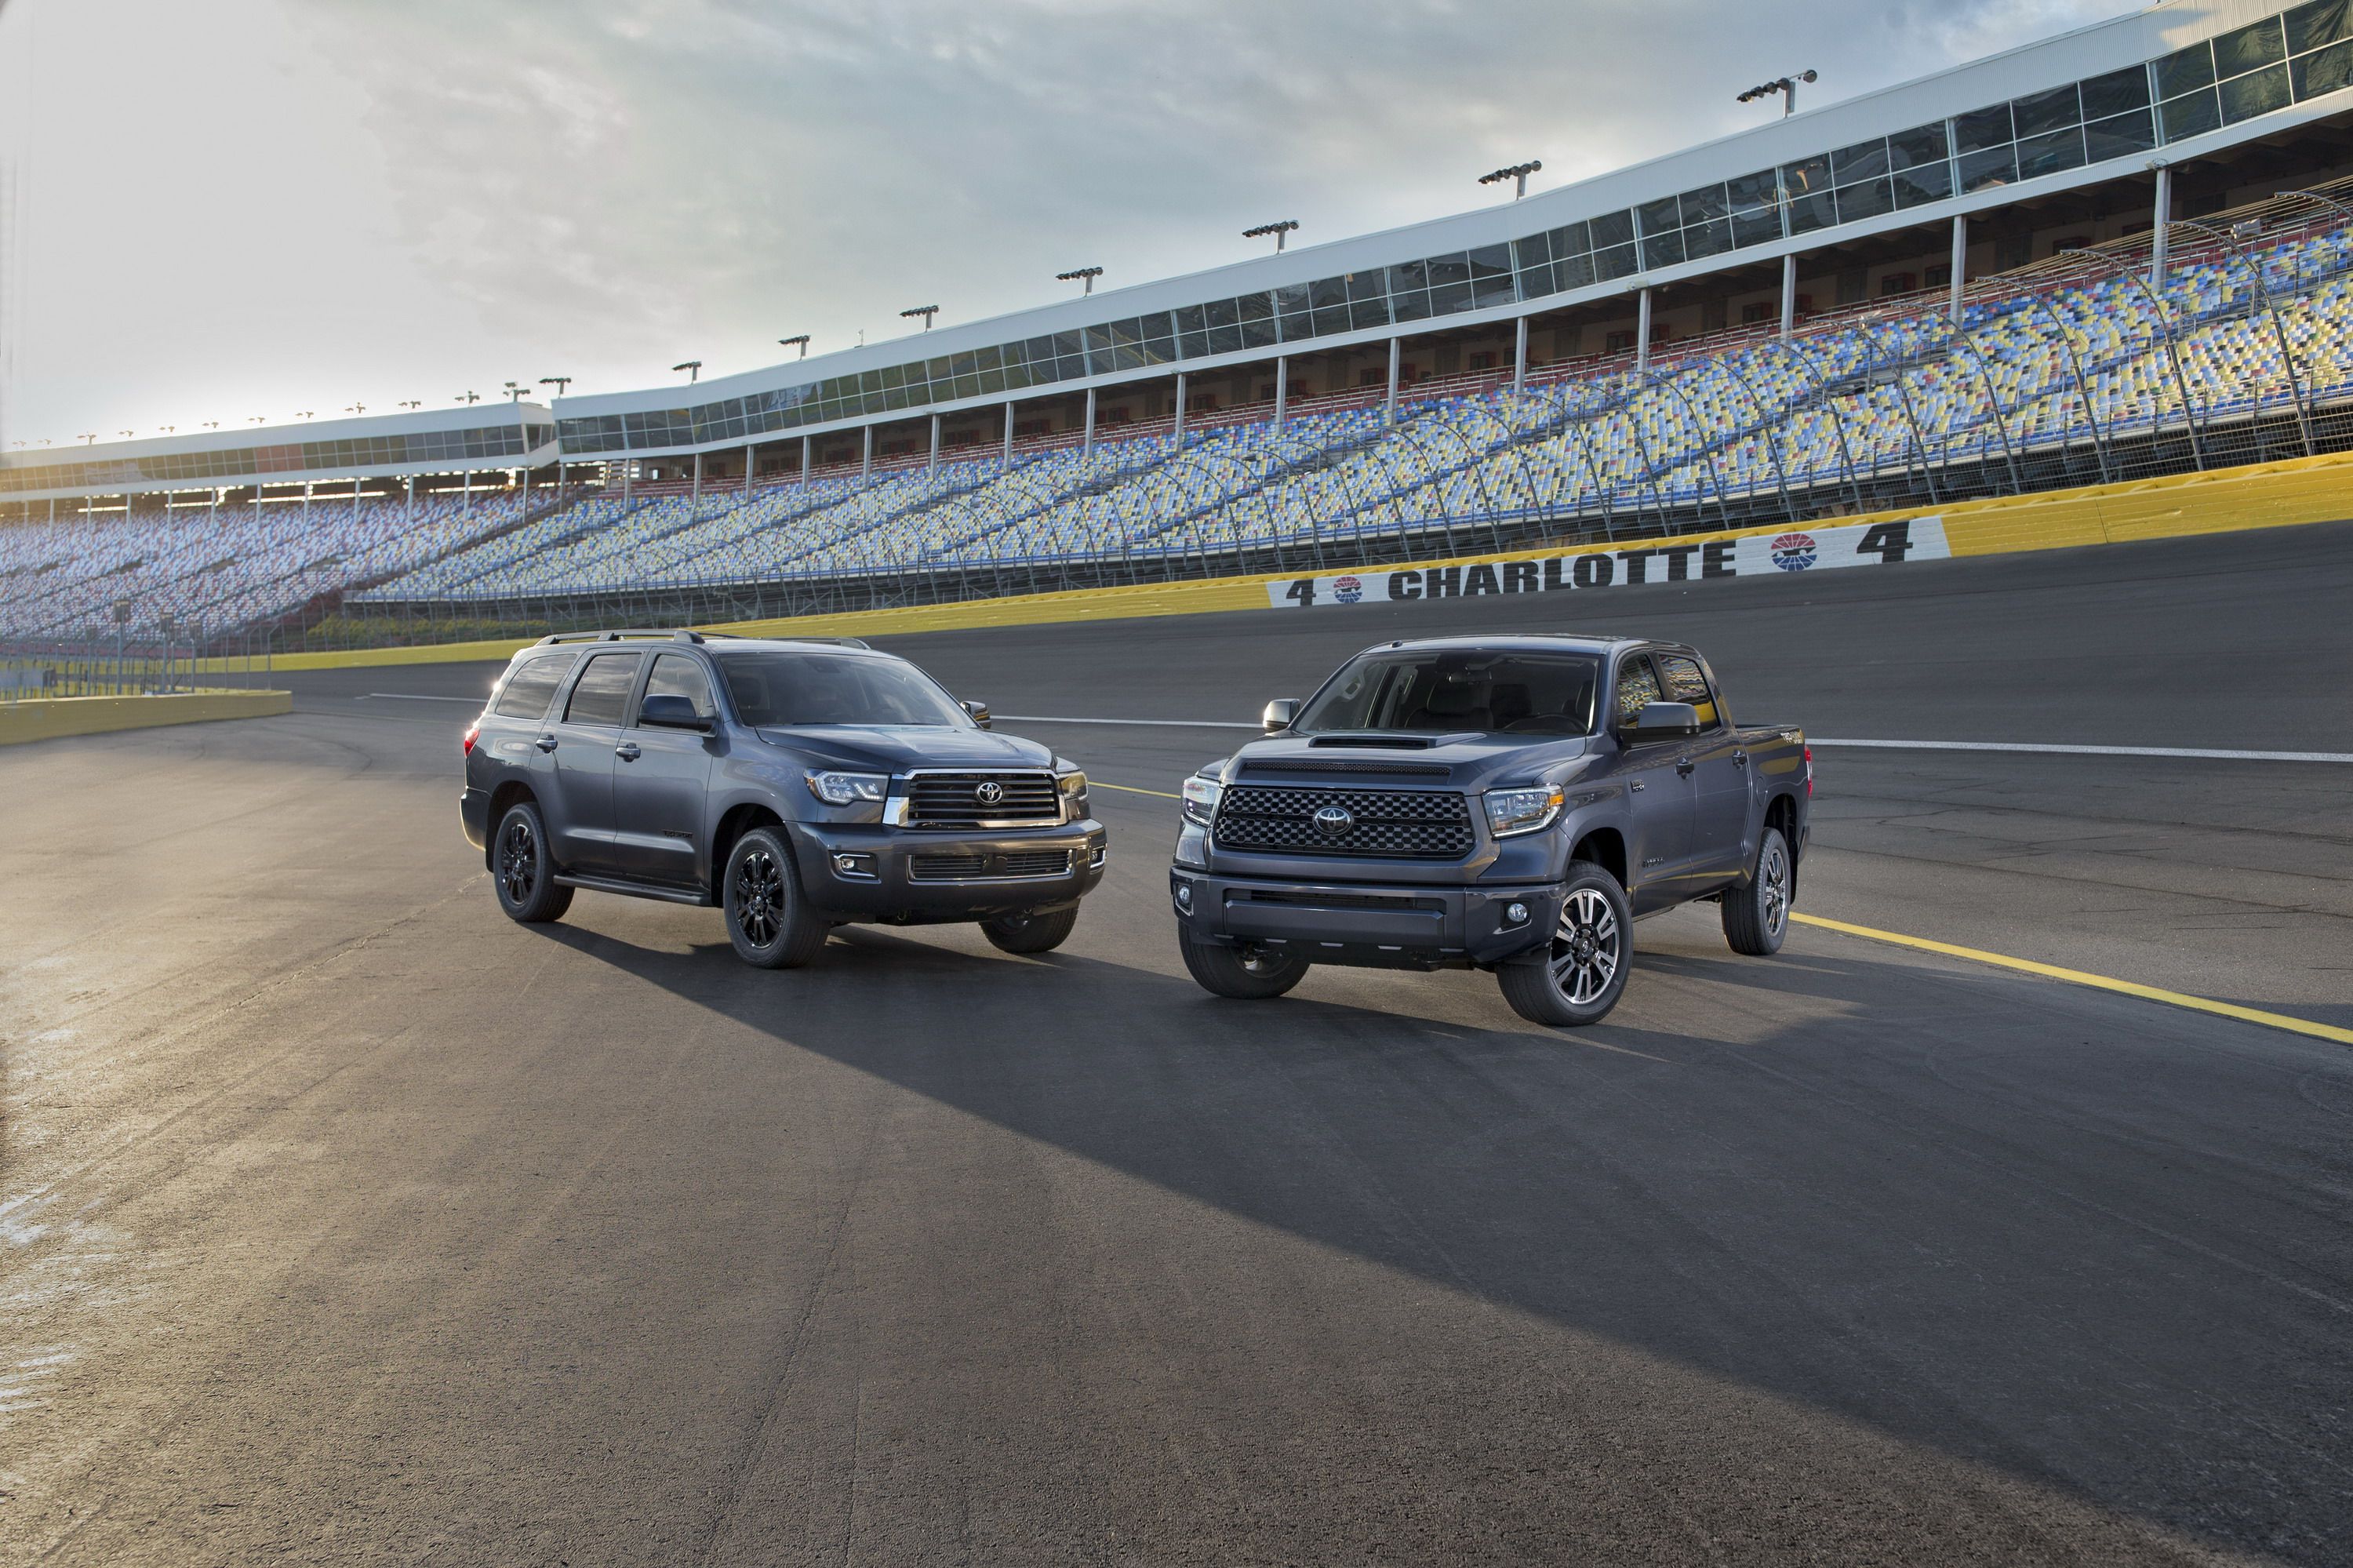 2017 TRD Sport Package Brings Added Styling and Handling Upgrades to 2018 Toyota Tundra and Sequoia